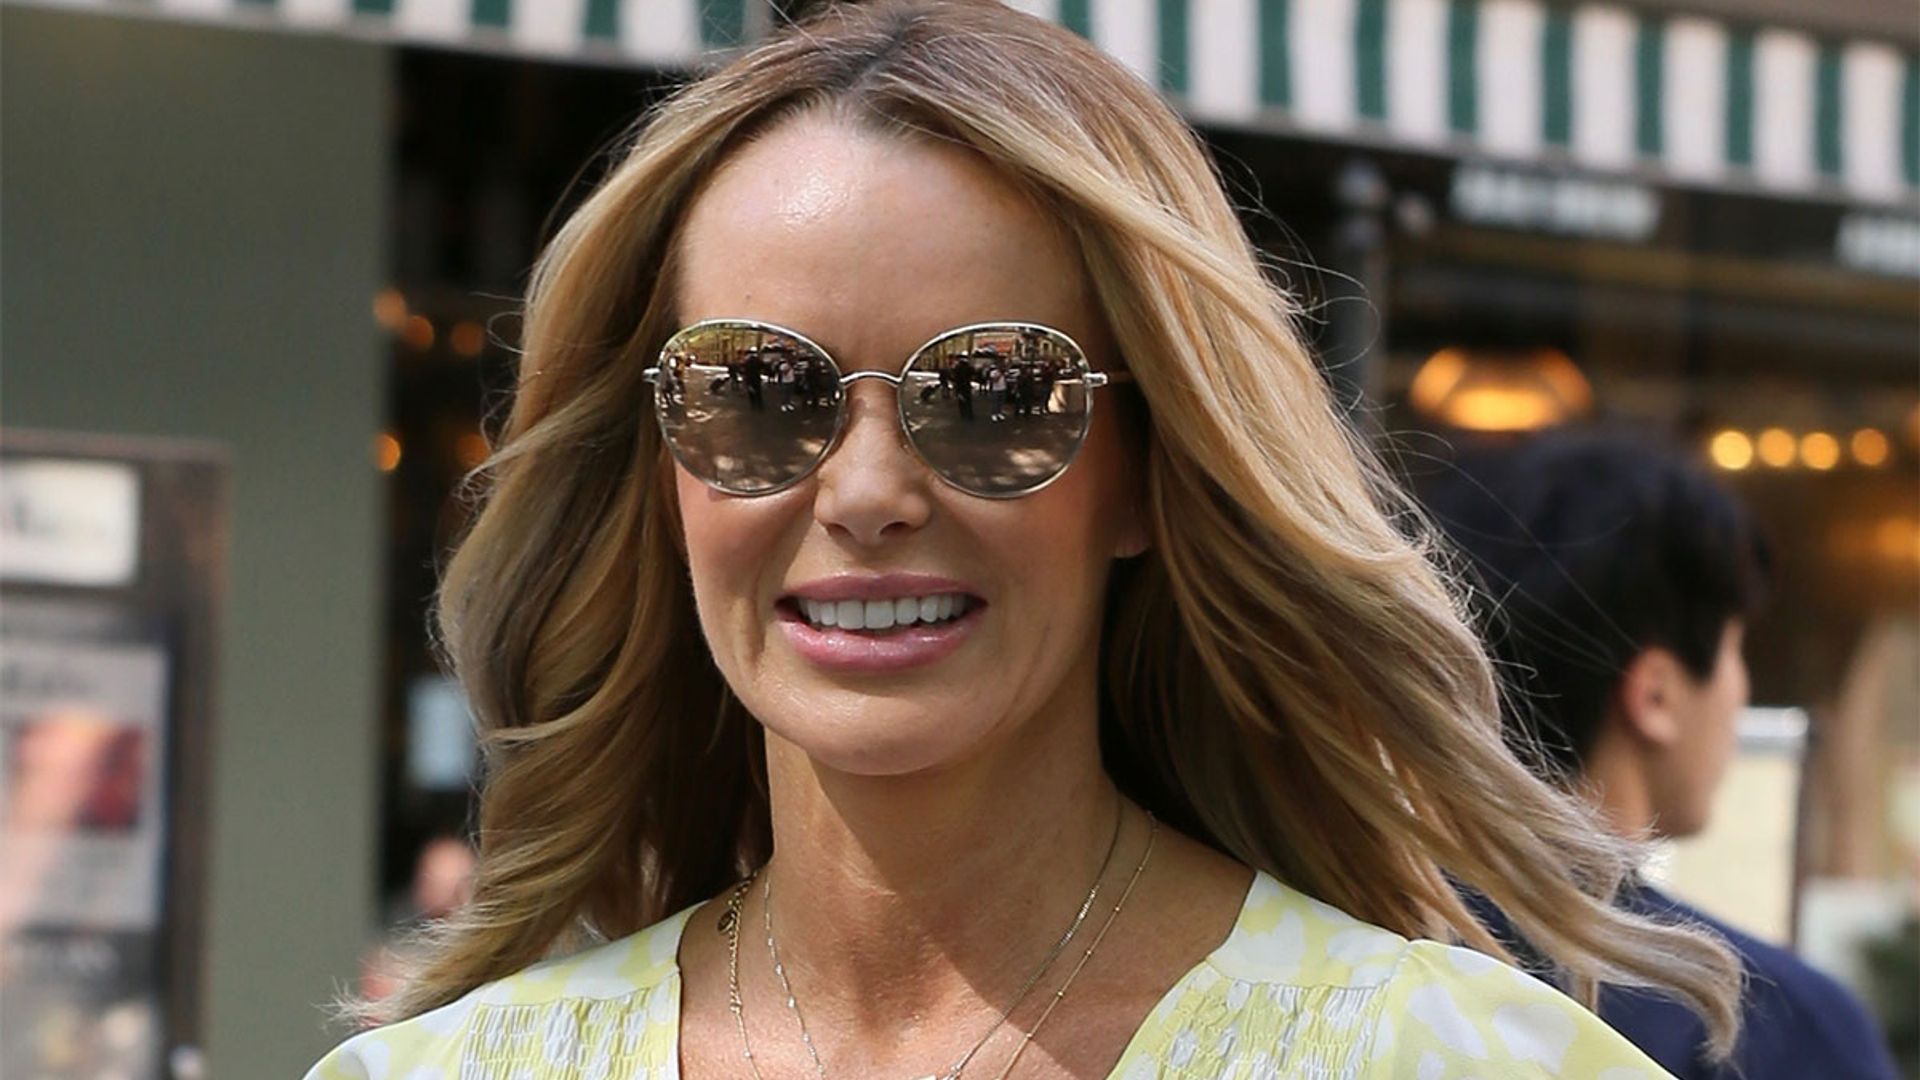 Amanda Holden wows in sexy shorts - and a pair of AMAZING Zara flats